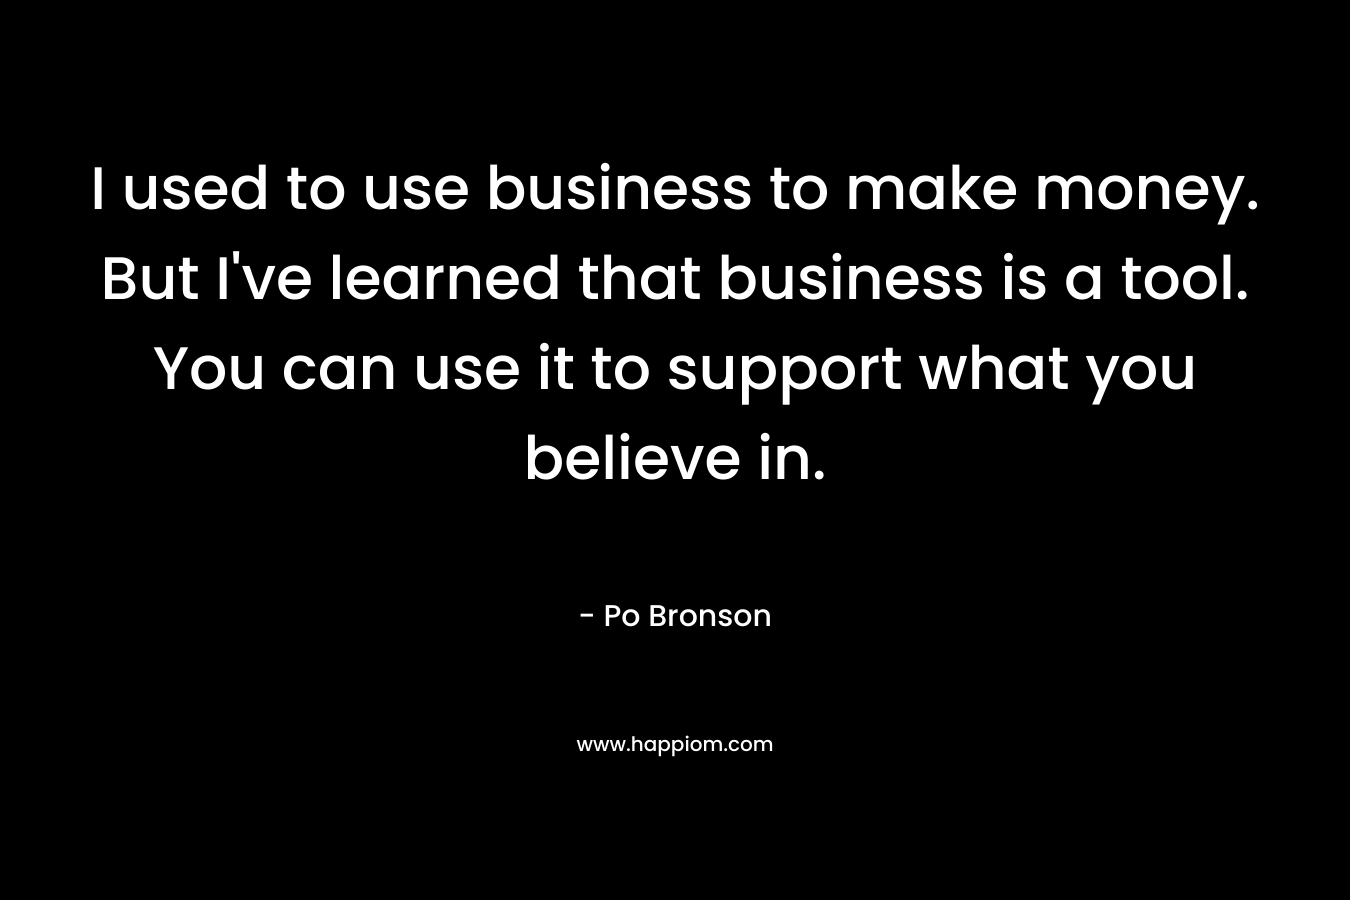 I used to use business to make money. But I've learned that business is a tool. You can use it to support what you believe in.